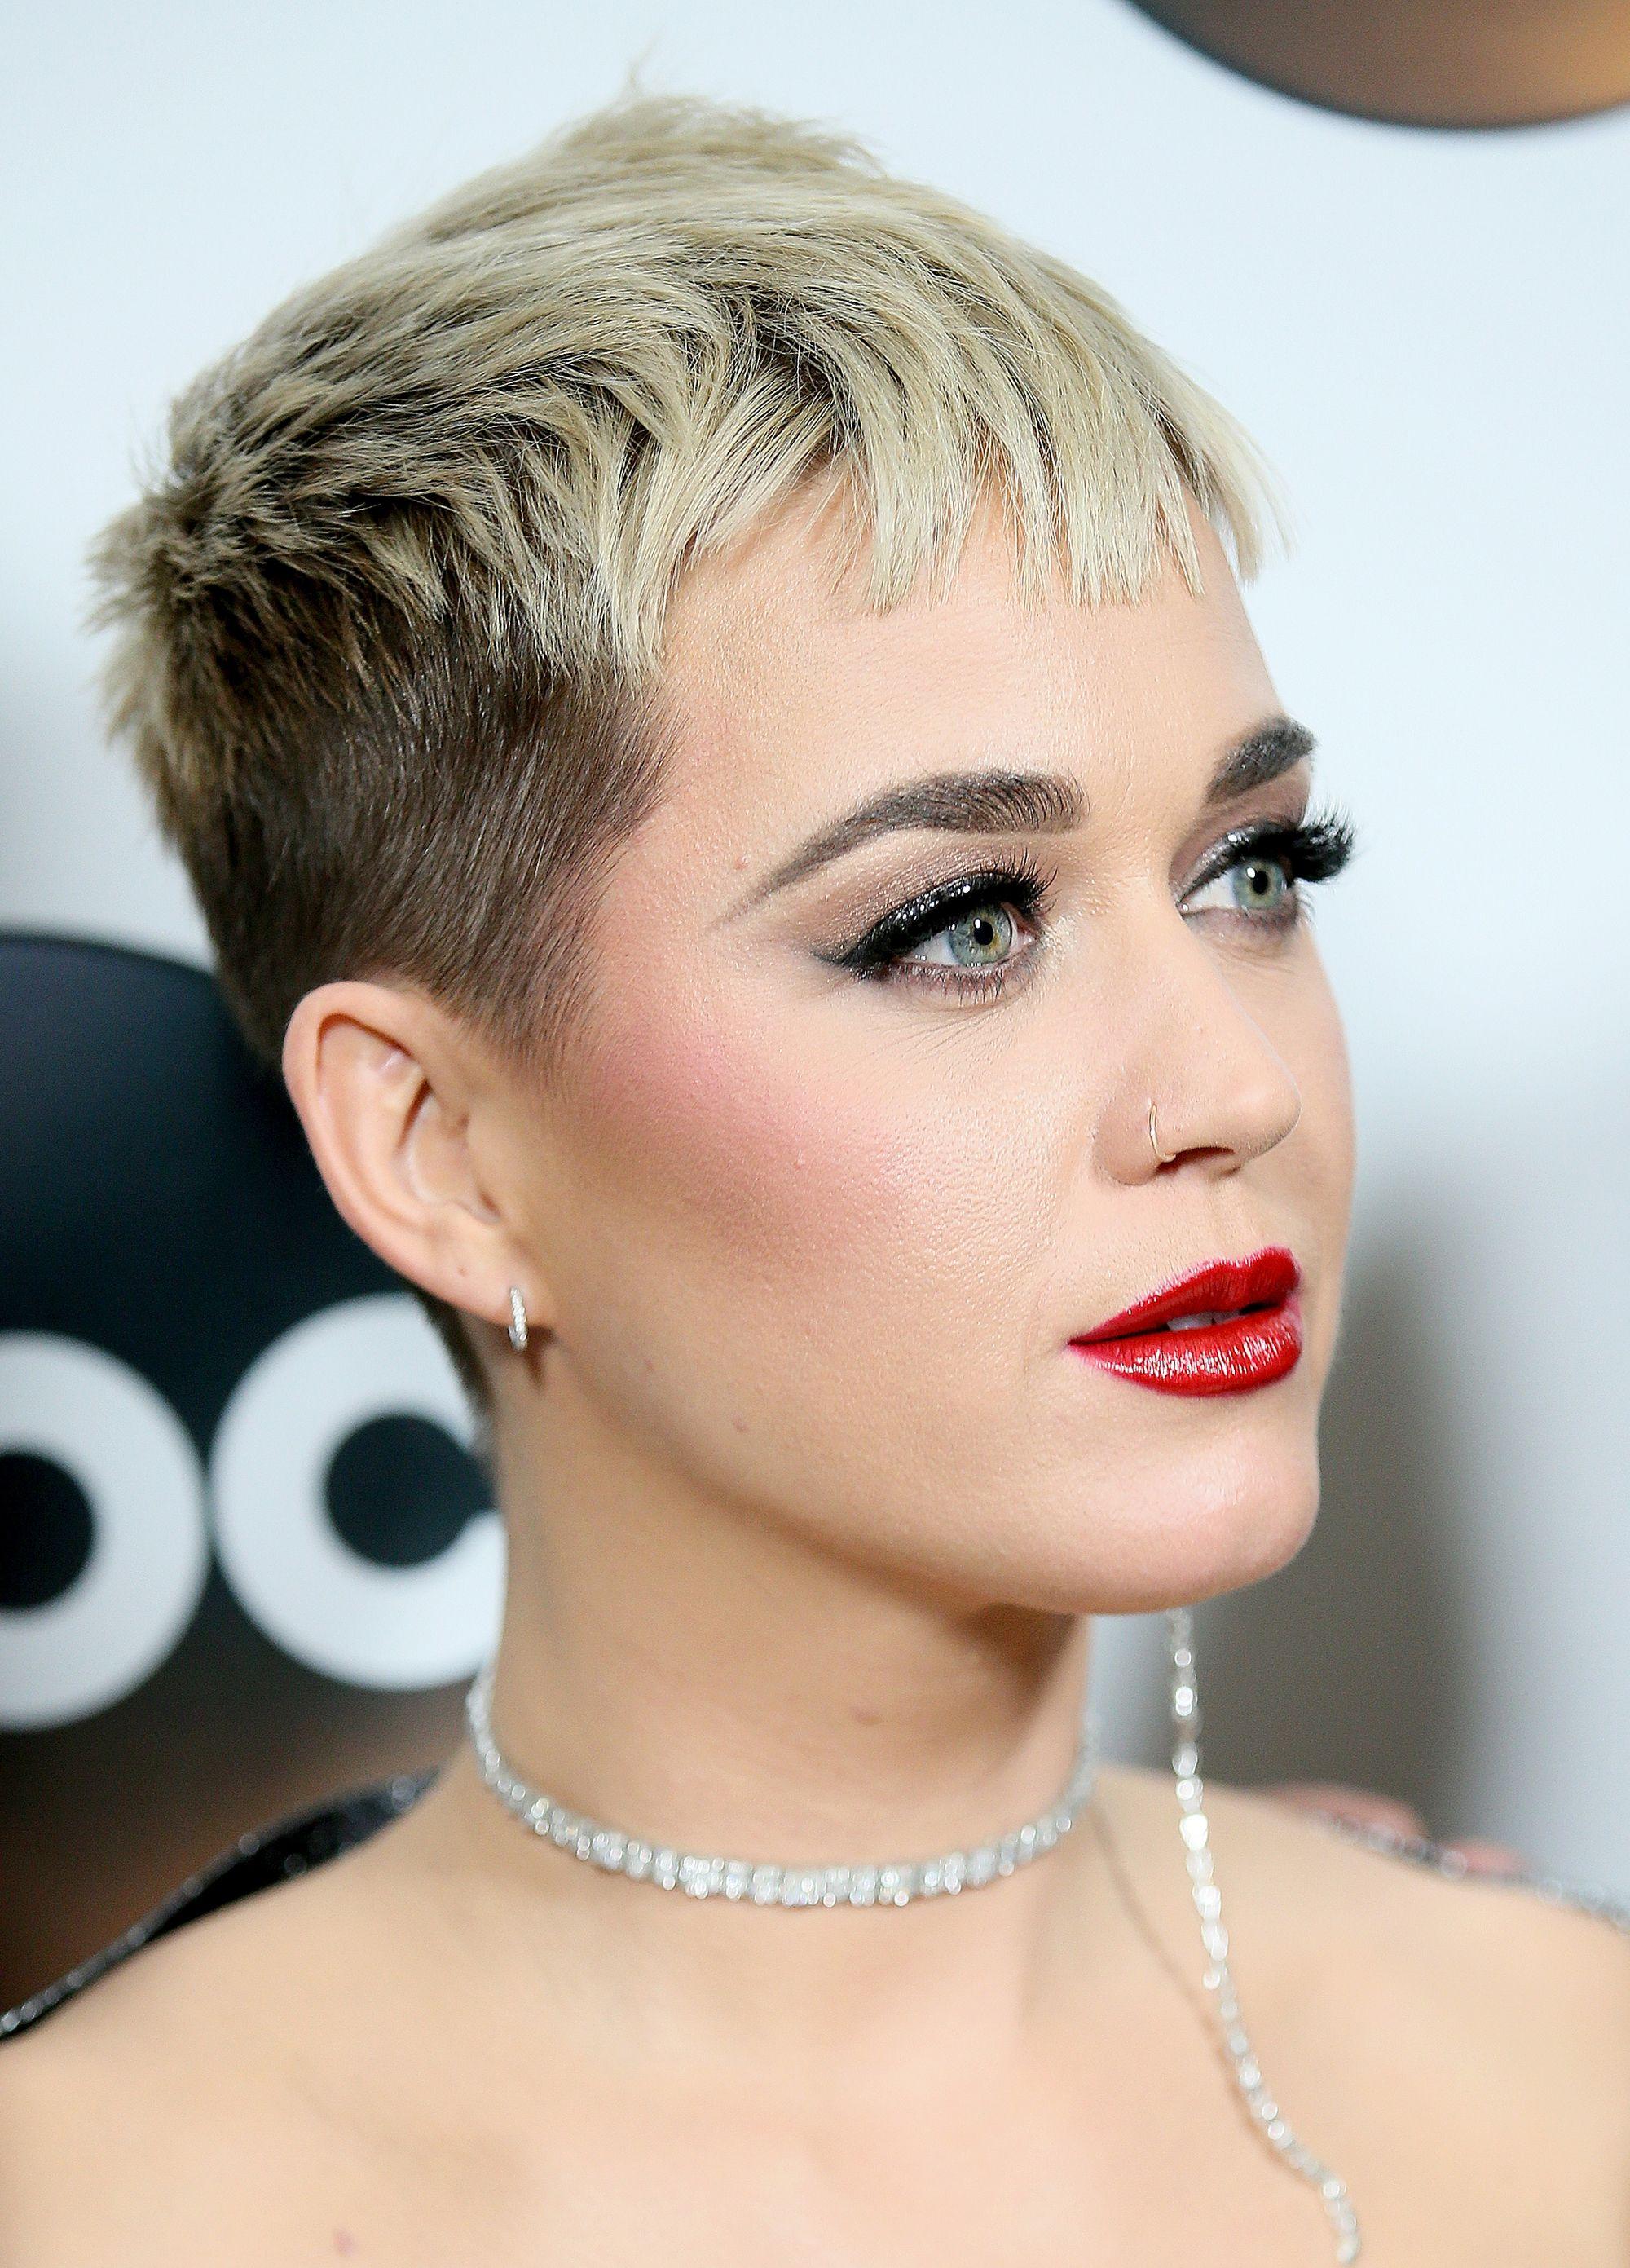 Get Katy Perry's Cat Eye and Red Lipstick